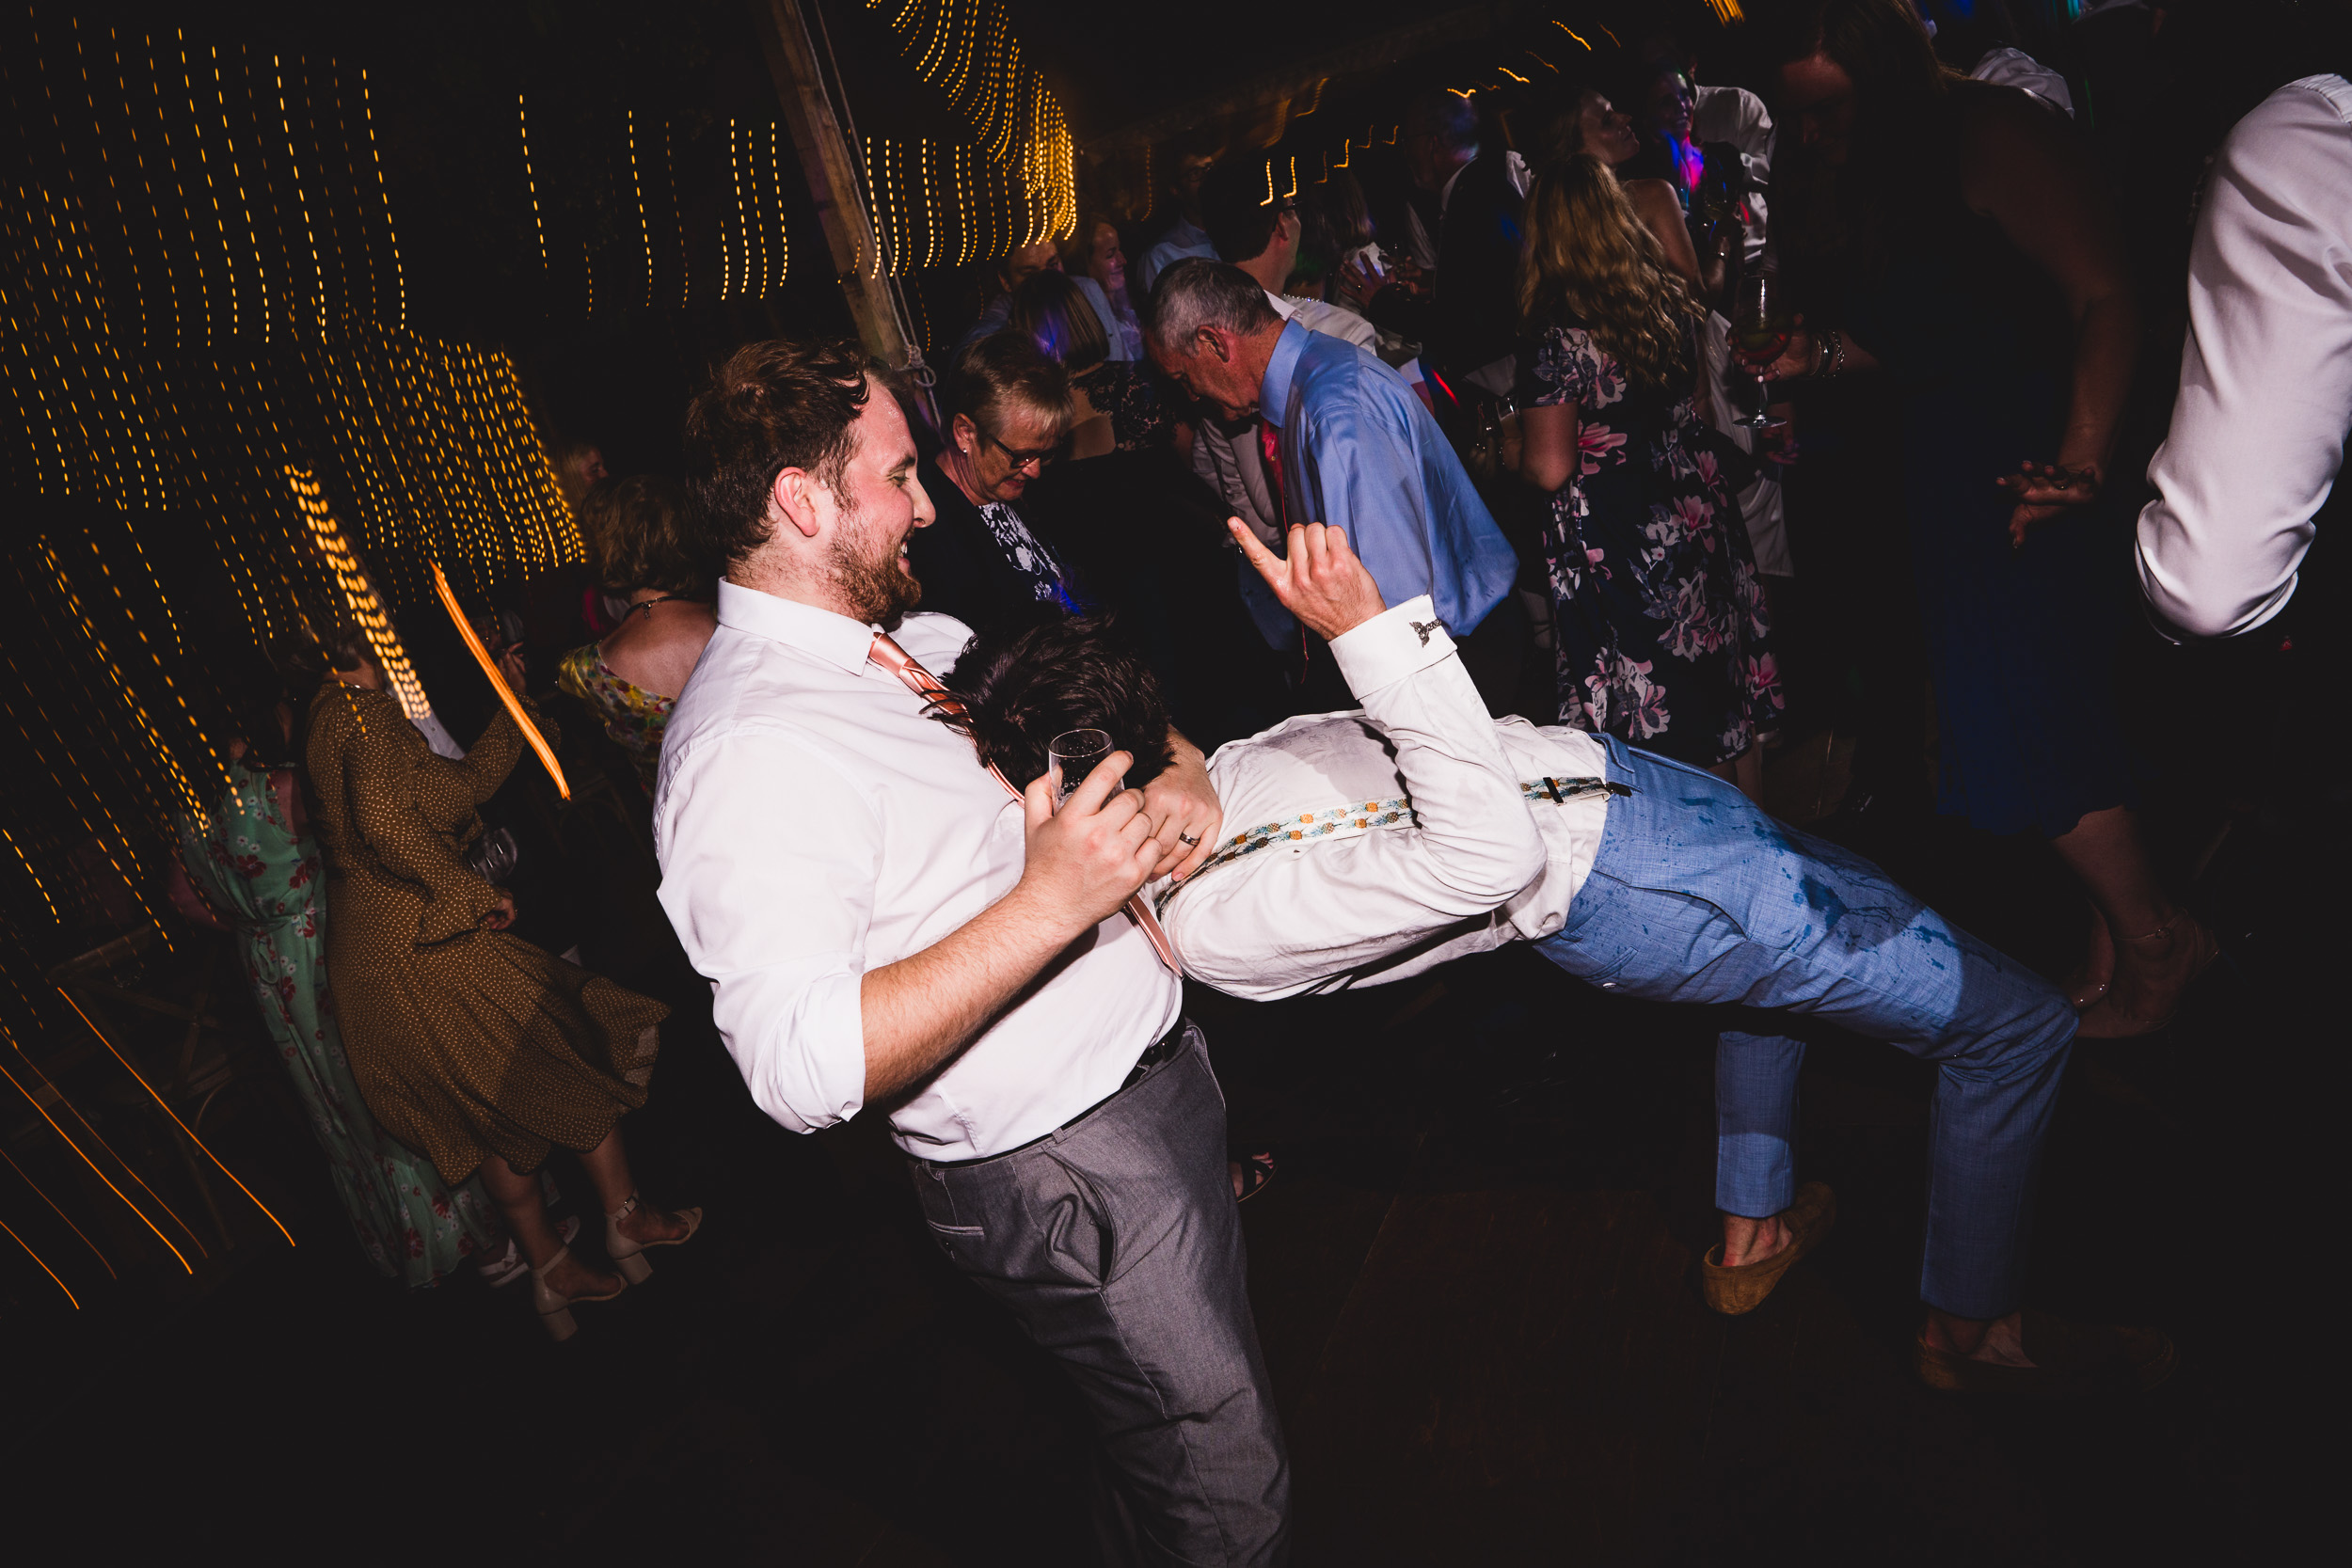 The groom and his wedding photographer dance on the dance floor at a wedding.